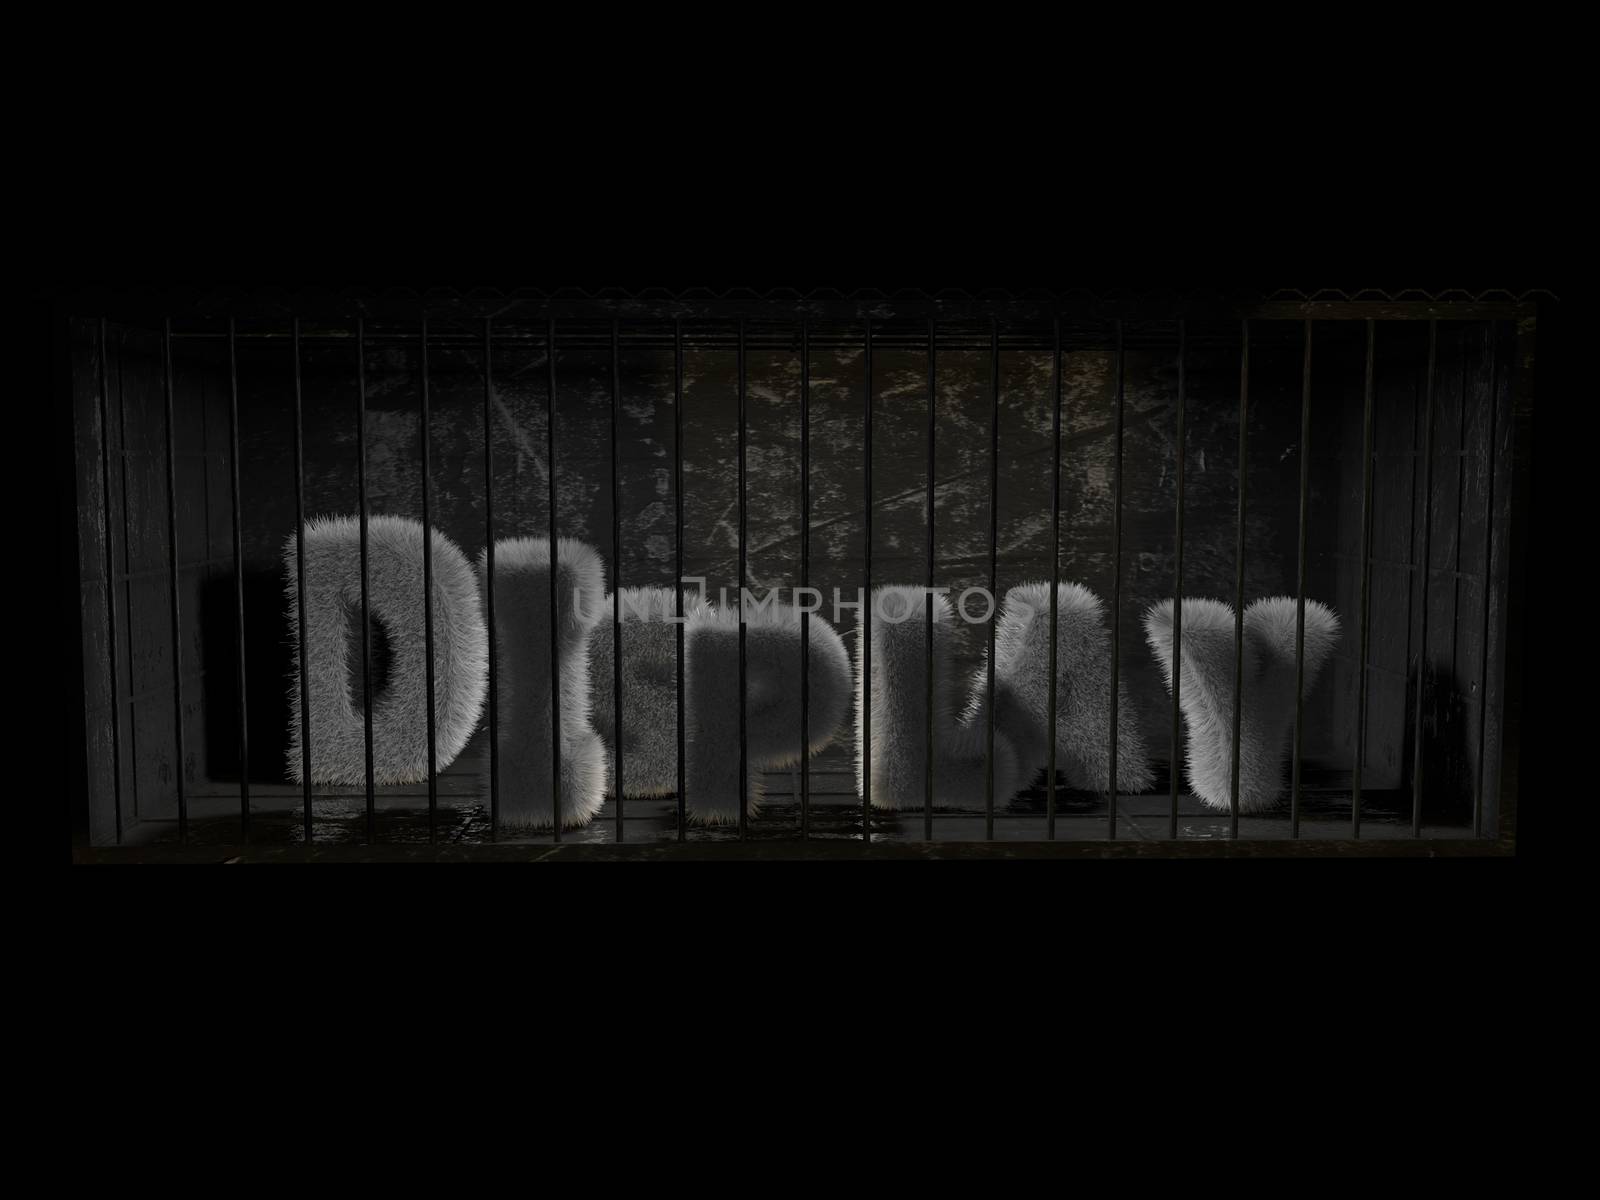 3D display word inside a prison by fares139